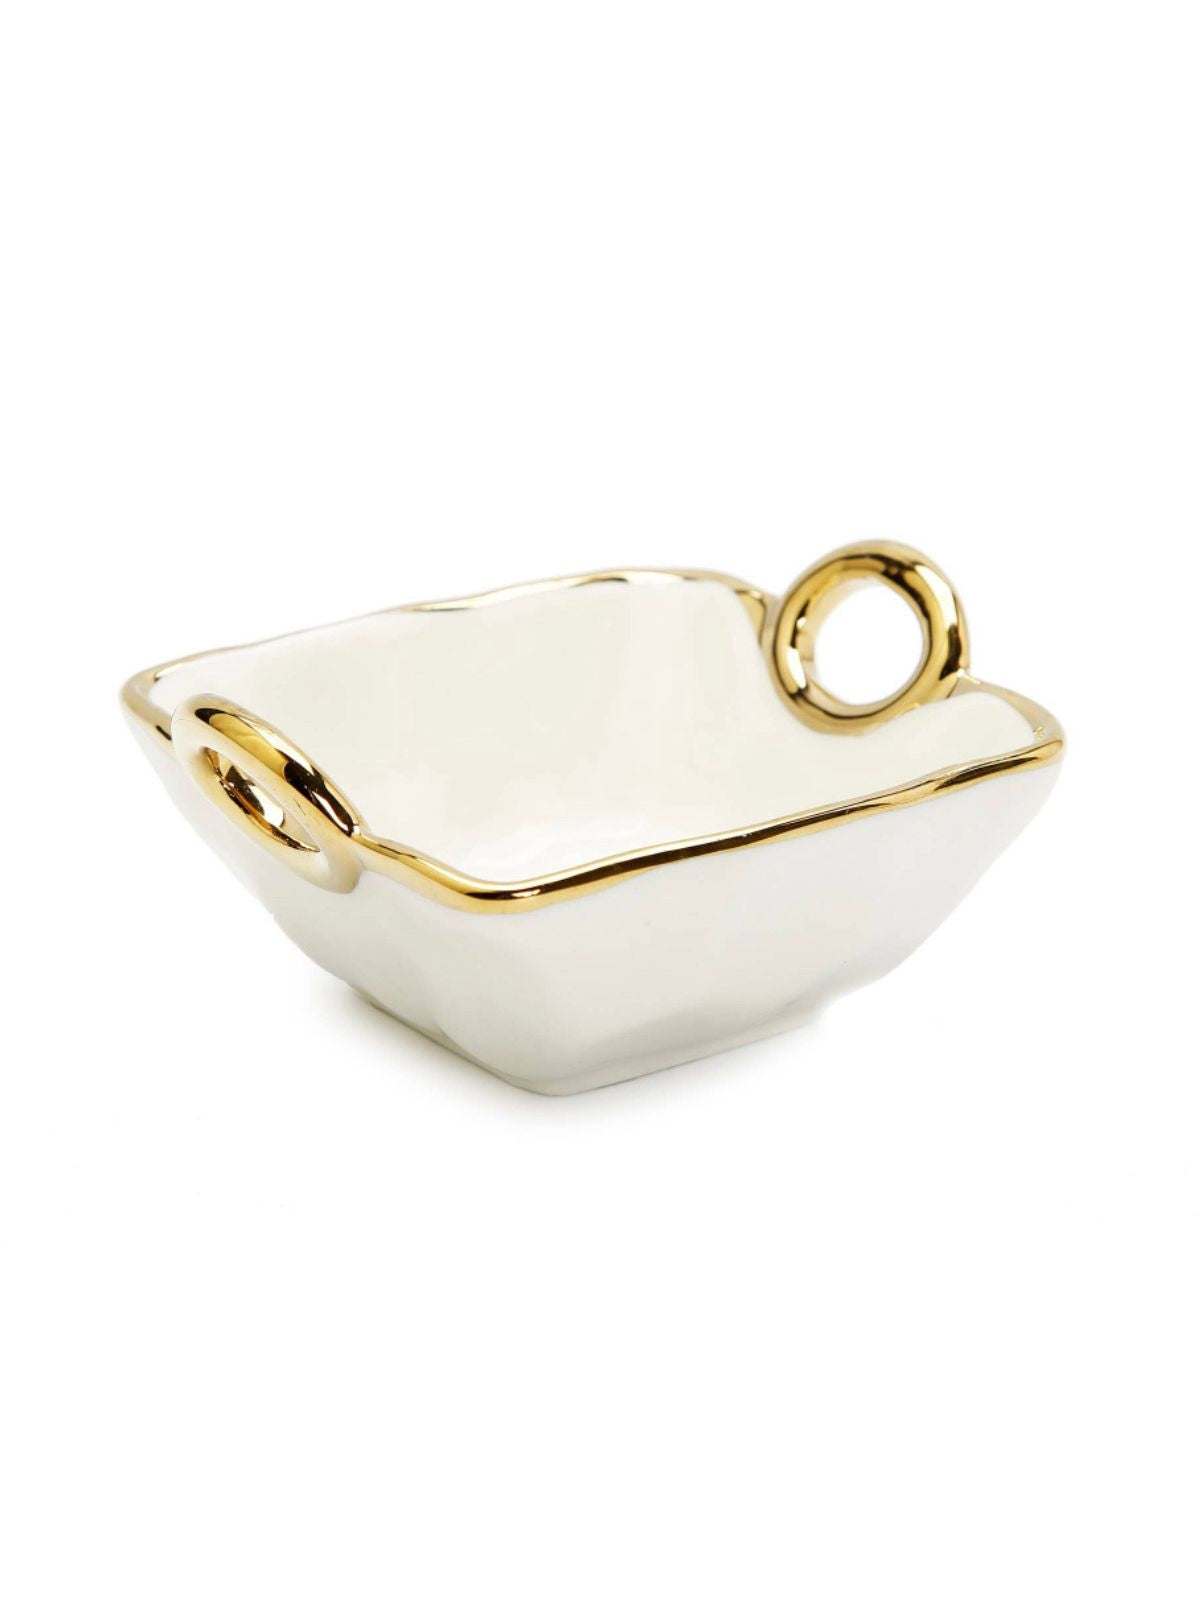 15L White Porcelain Dish with 3 Bowls and Gold Handles. Sold by KYA Home Decor.   